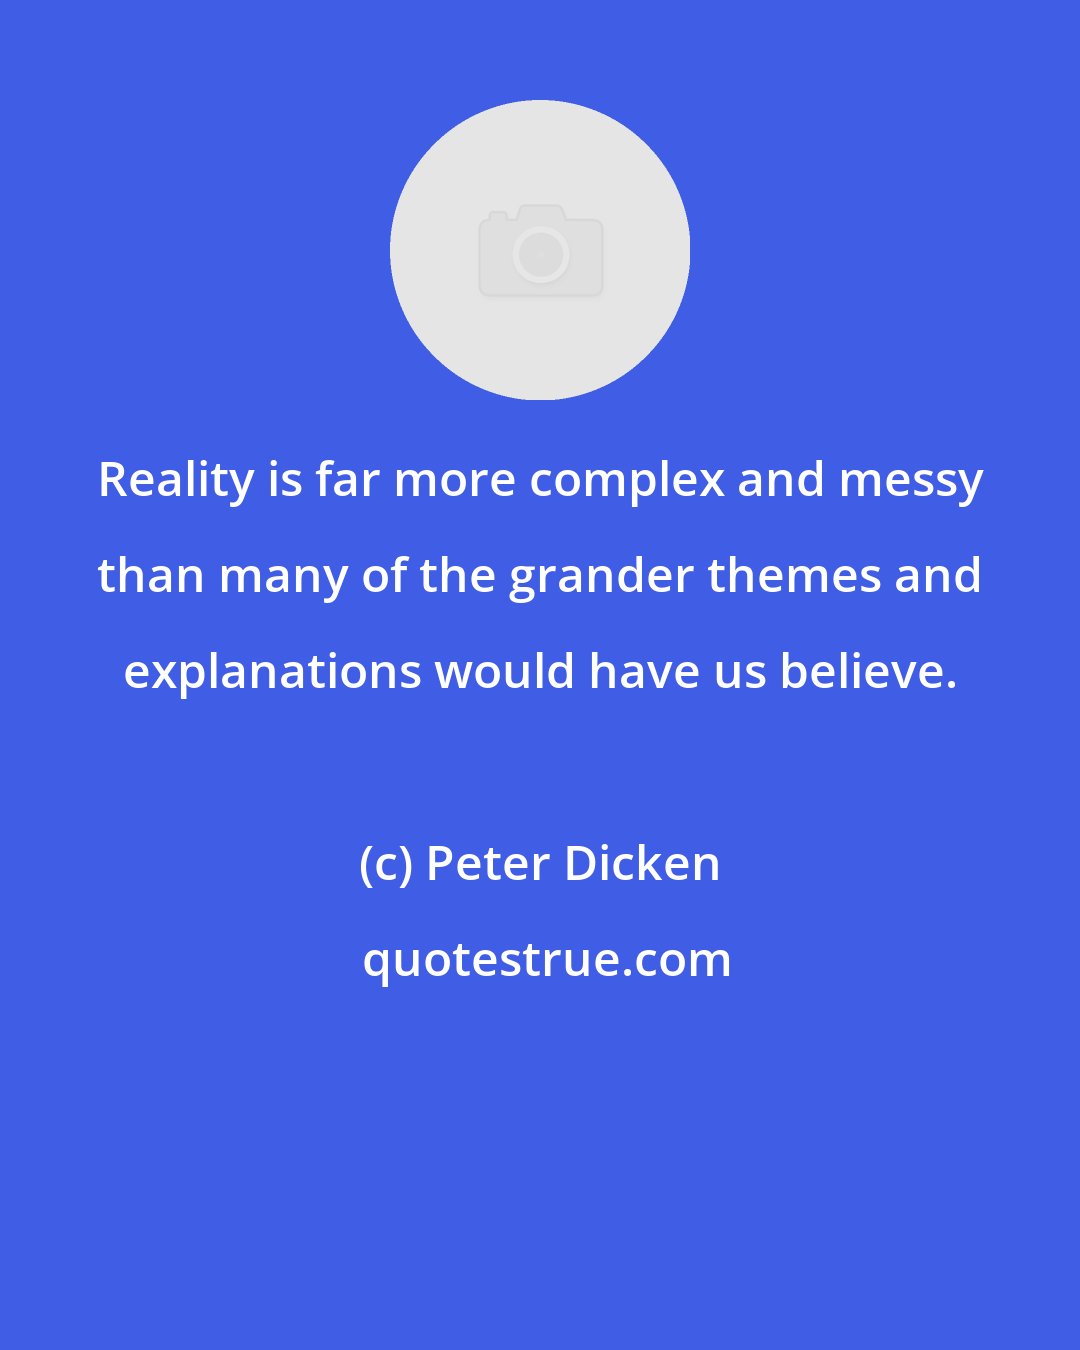 Peter Dicken: Reality is far more complex and messy than many of the grander themes and explanations would have us believe.